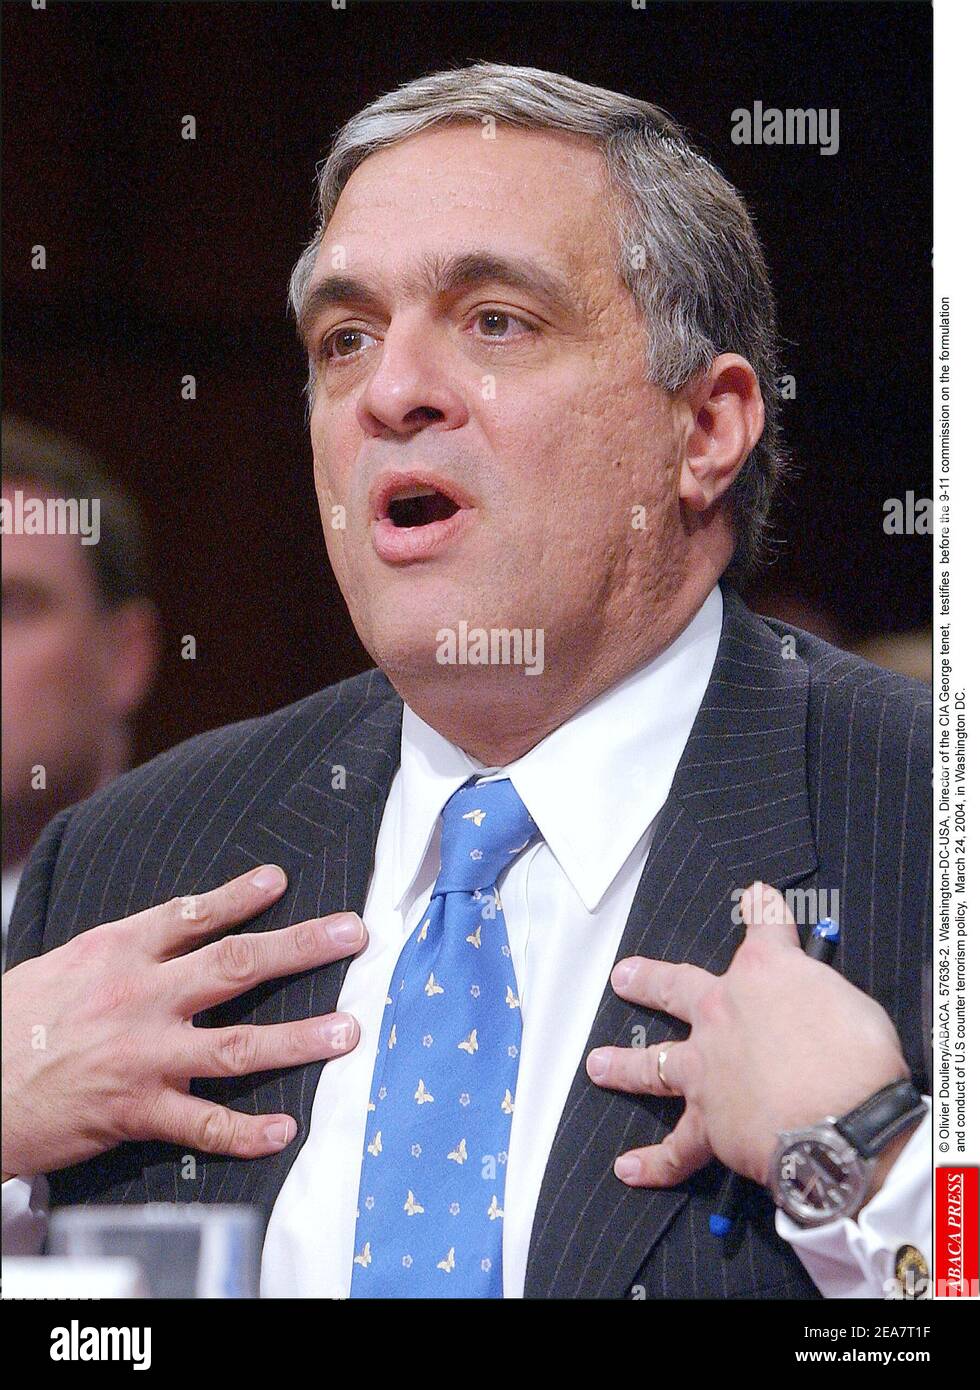 © Olivier Douliery/ABACA. 57636-2. Washington-DC-USA, March 24, 2004. Director of the CIA George tenet, testifies before the 9-11 commission on the formulation and conduct of U.S counter terrorism policy, March 24, 2004, in Washington DC. Stock Photo